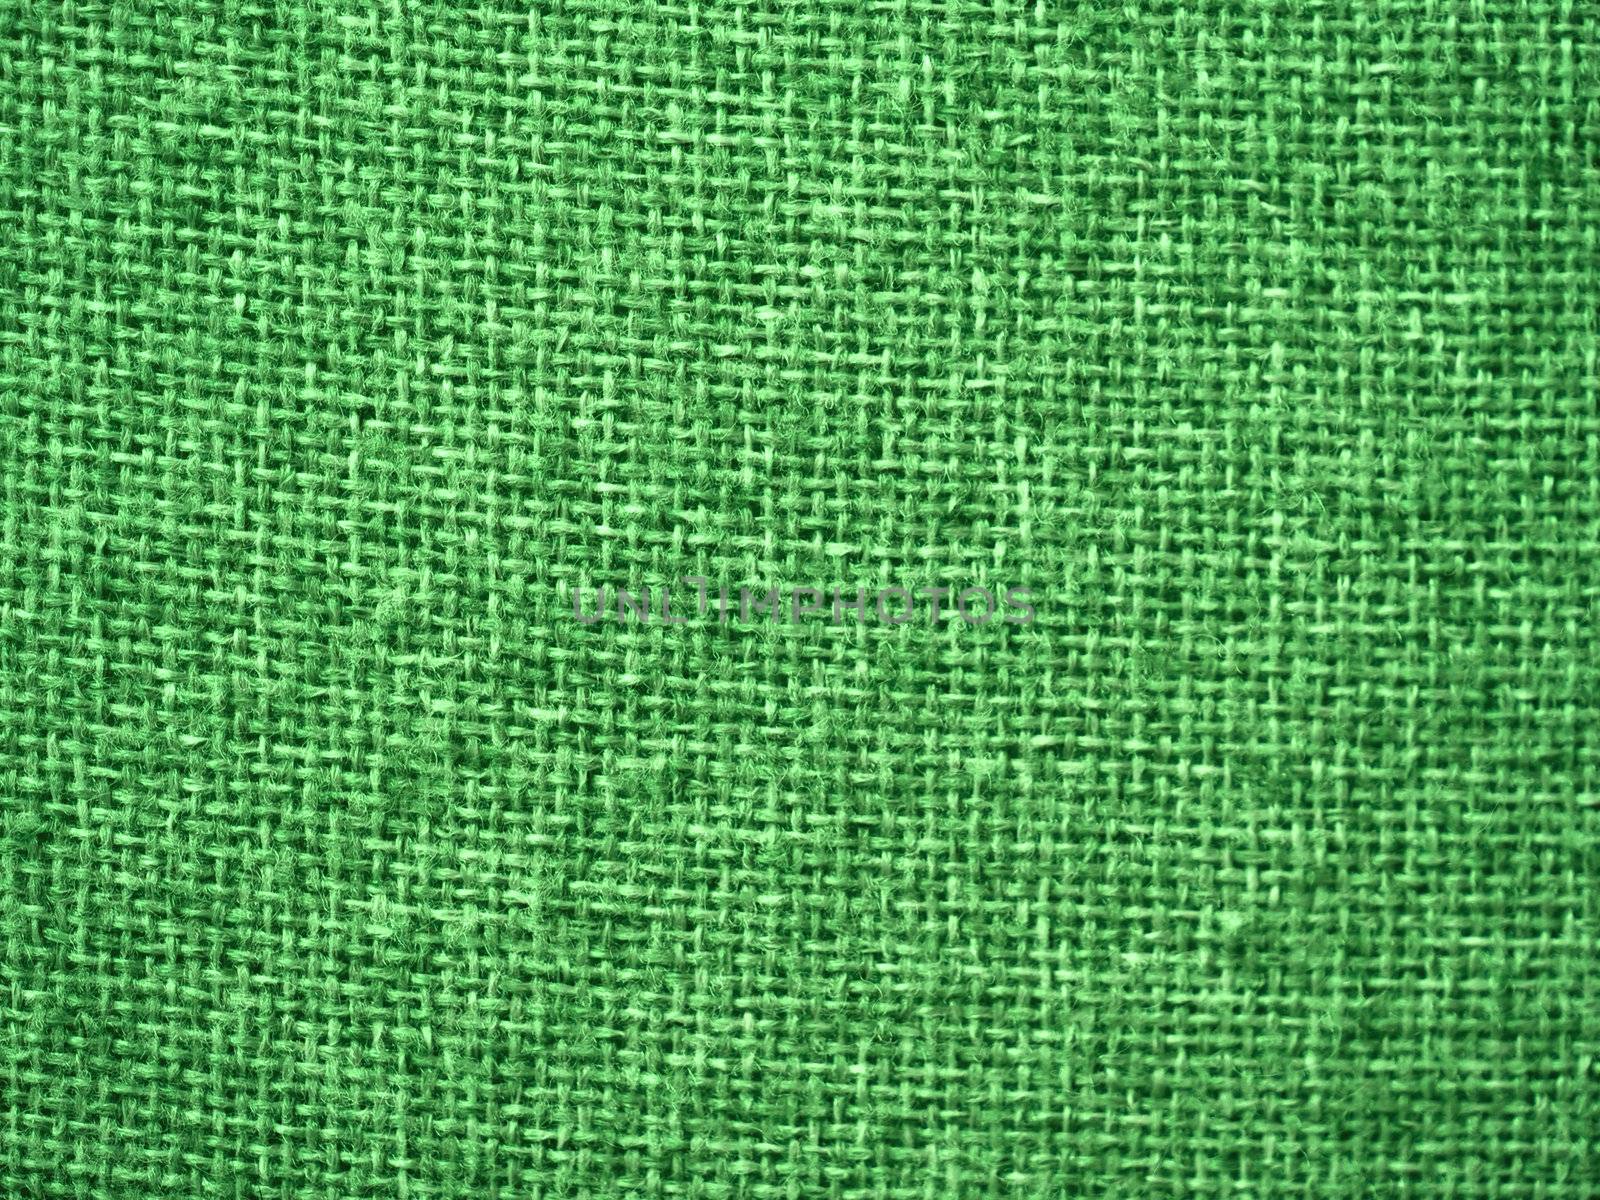 Green burlap fabric closeup for texture and backgrounds